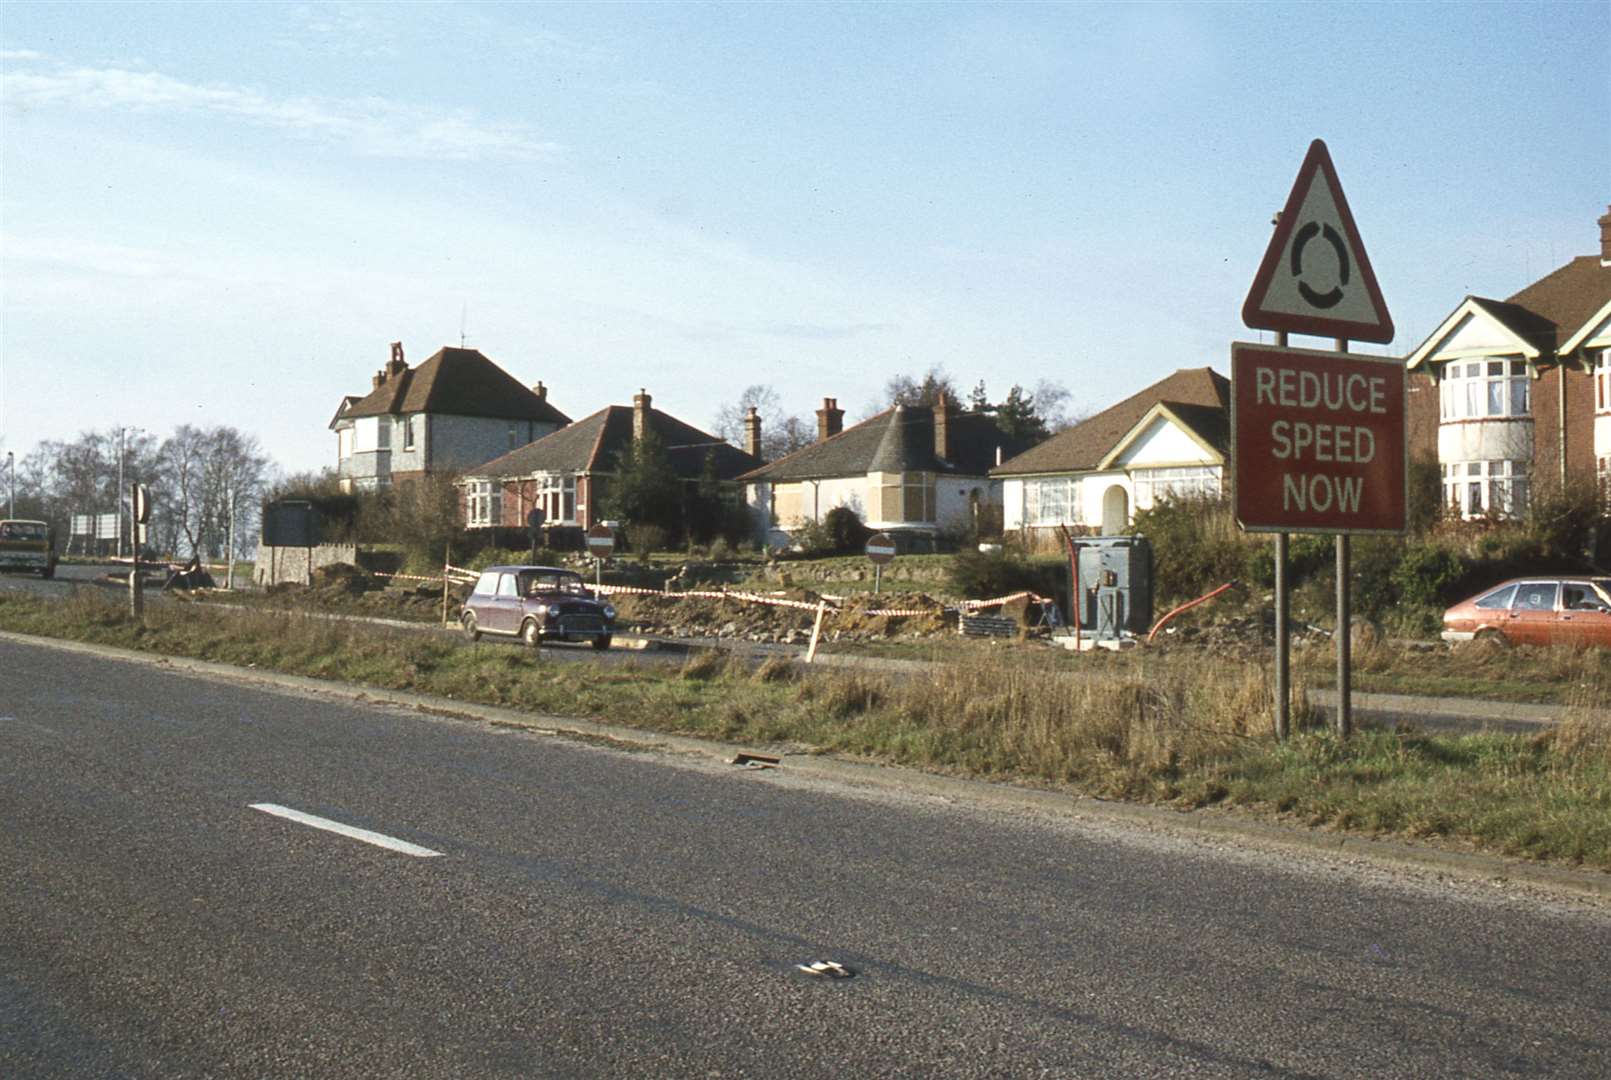 Some of the blighted houses in The Street Willesborough in 1978, beside the Ashford Bypass which was converted to the M20. Picture: Neville Marsh